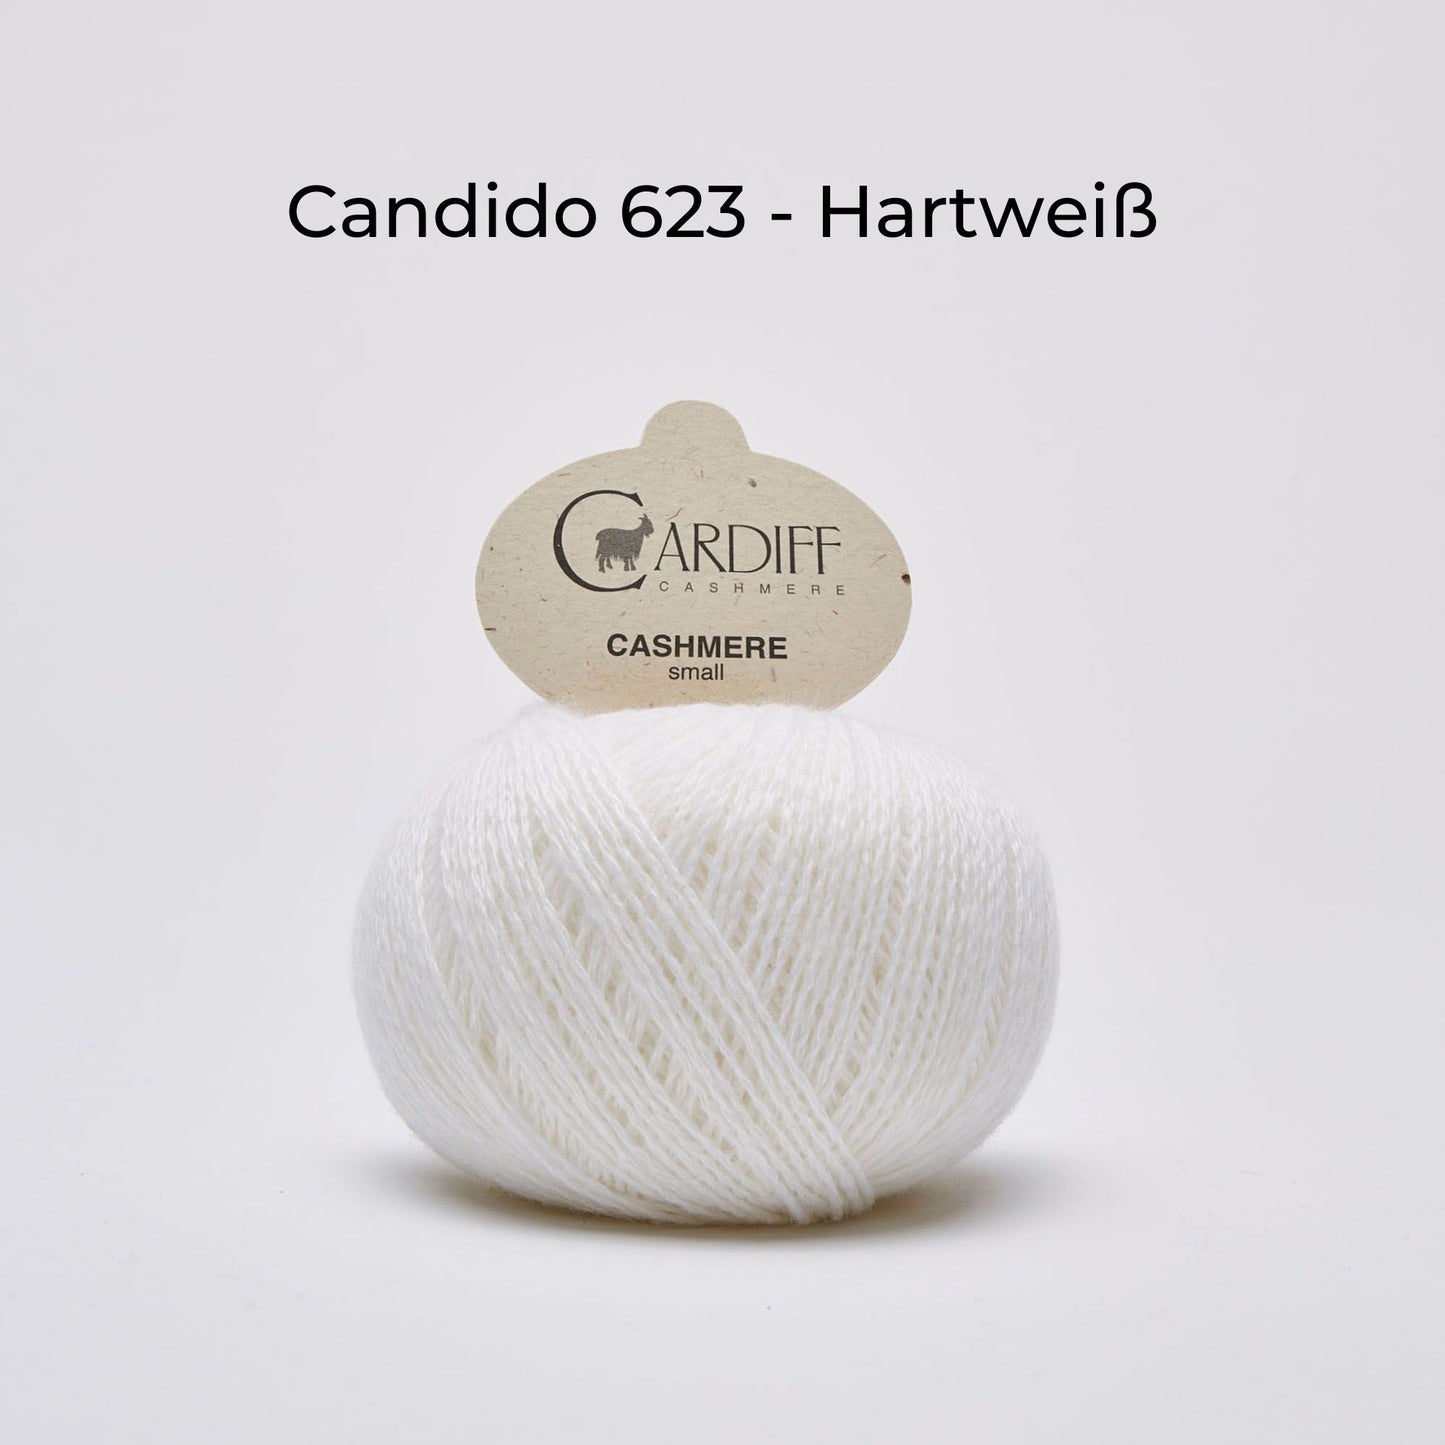 Kaschmirwolle - Cardiff Cashmere Small 4/28 - NS 2.5-3.5 mm